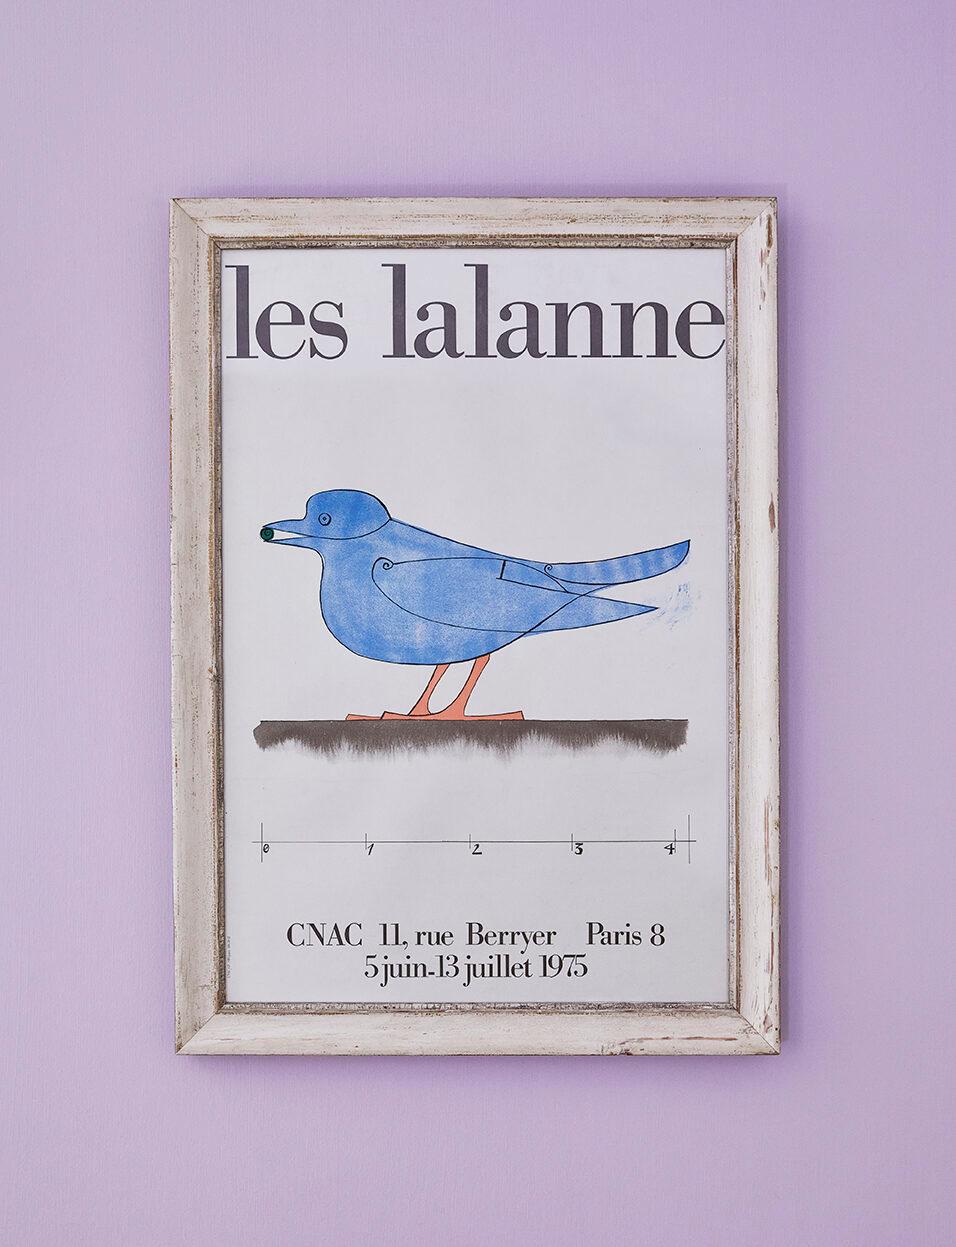 Les Lalanne,
France, 1975

Vintage exhibition poster in antique frame.
Made on the occasion of the Claude and Francois-Xavier Lalanne exhibition at Centre National d'Art Contemporain in Paris. 

Measures: H 83 x W 54 cm.